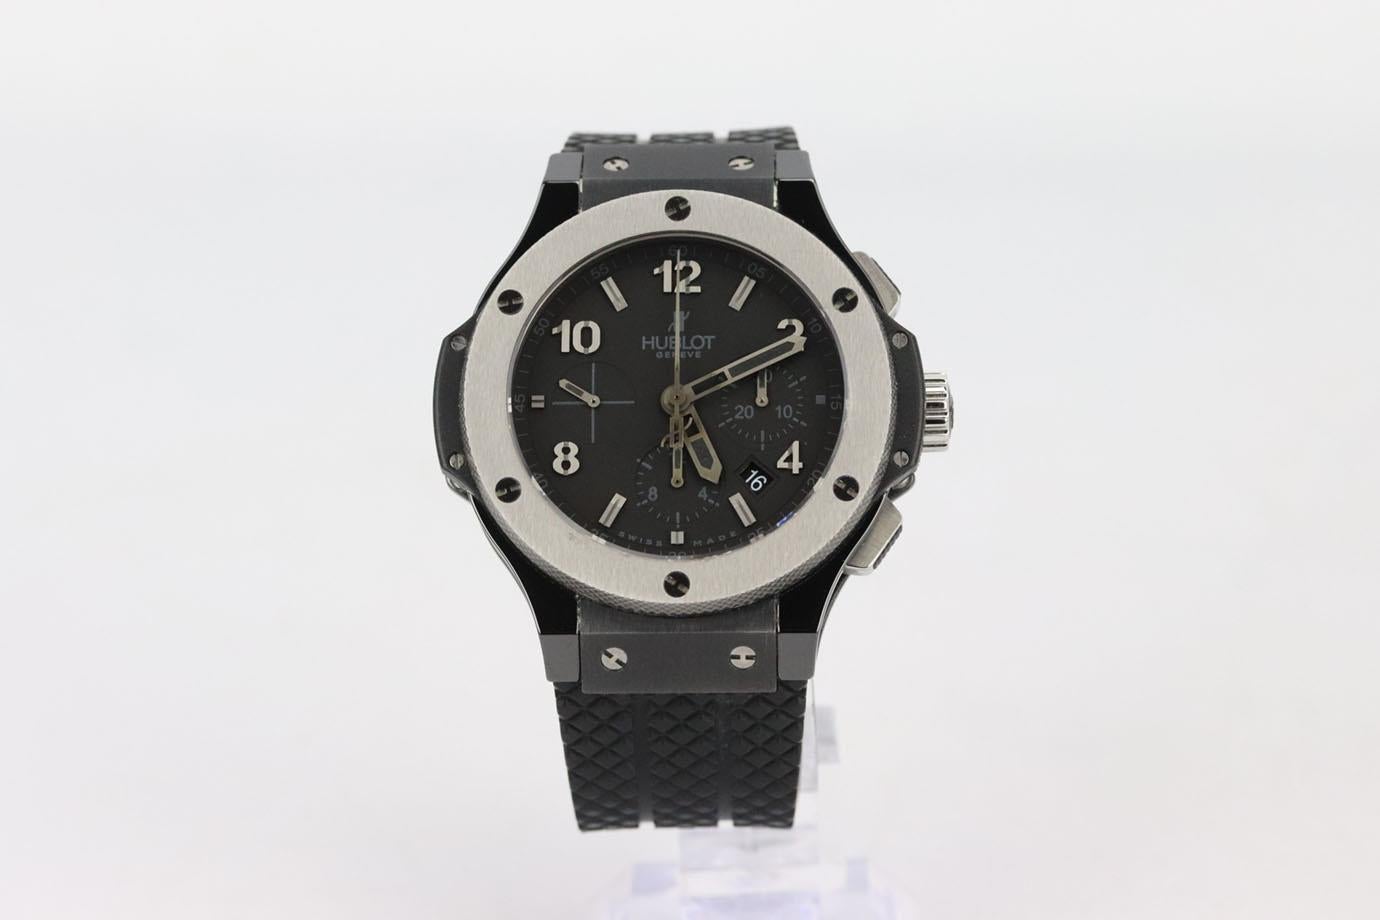 Hublot Big Bang ceramic chronograph black Arabic 44mm wrist watch. This ’Big Bang’ 44mm watch by Hublot has been crafted at the brand's Swiss atelier from ceramic with an intricate automatic movement and has a black dial and finished with a black